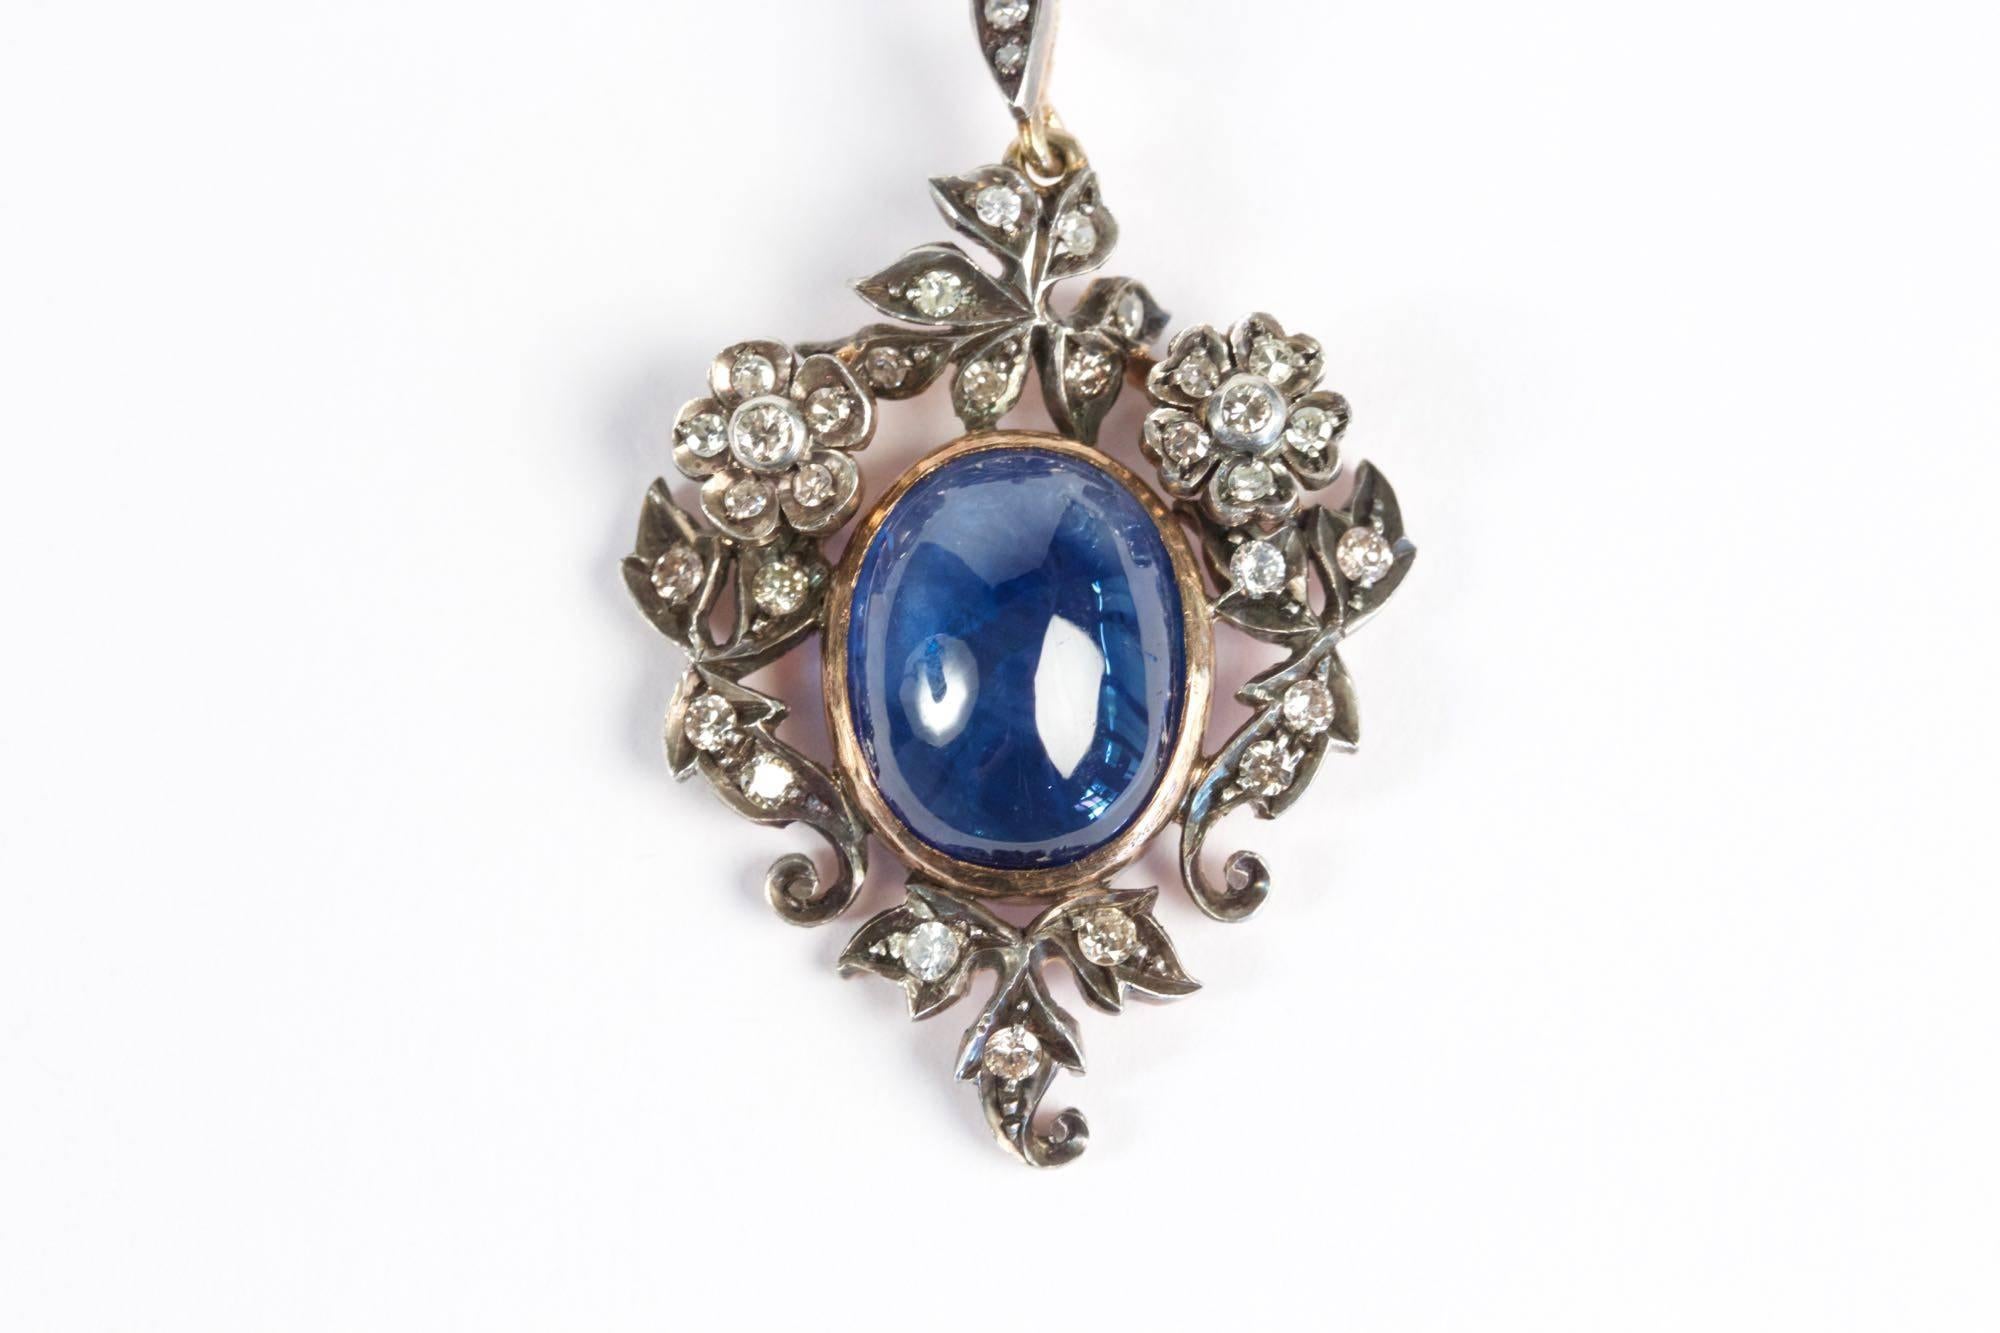 Necklace with 18k gold pendant set with Ceylan Cabochon Sapphire (approximately 10 carats) and old cut Diamonds flowers (total diamonds weight estimated at approximately 1.80 carats). Platinum chain. Circa 1870.